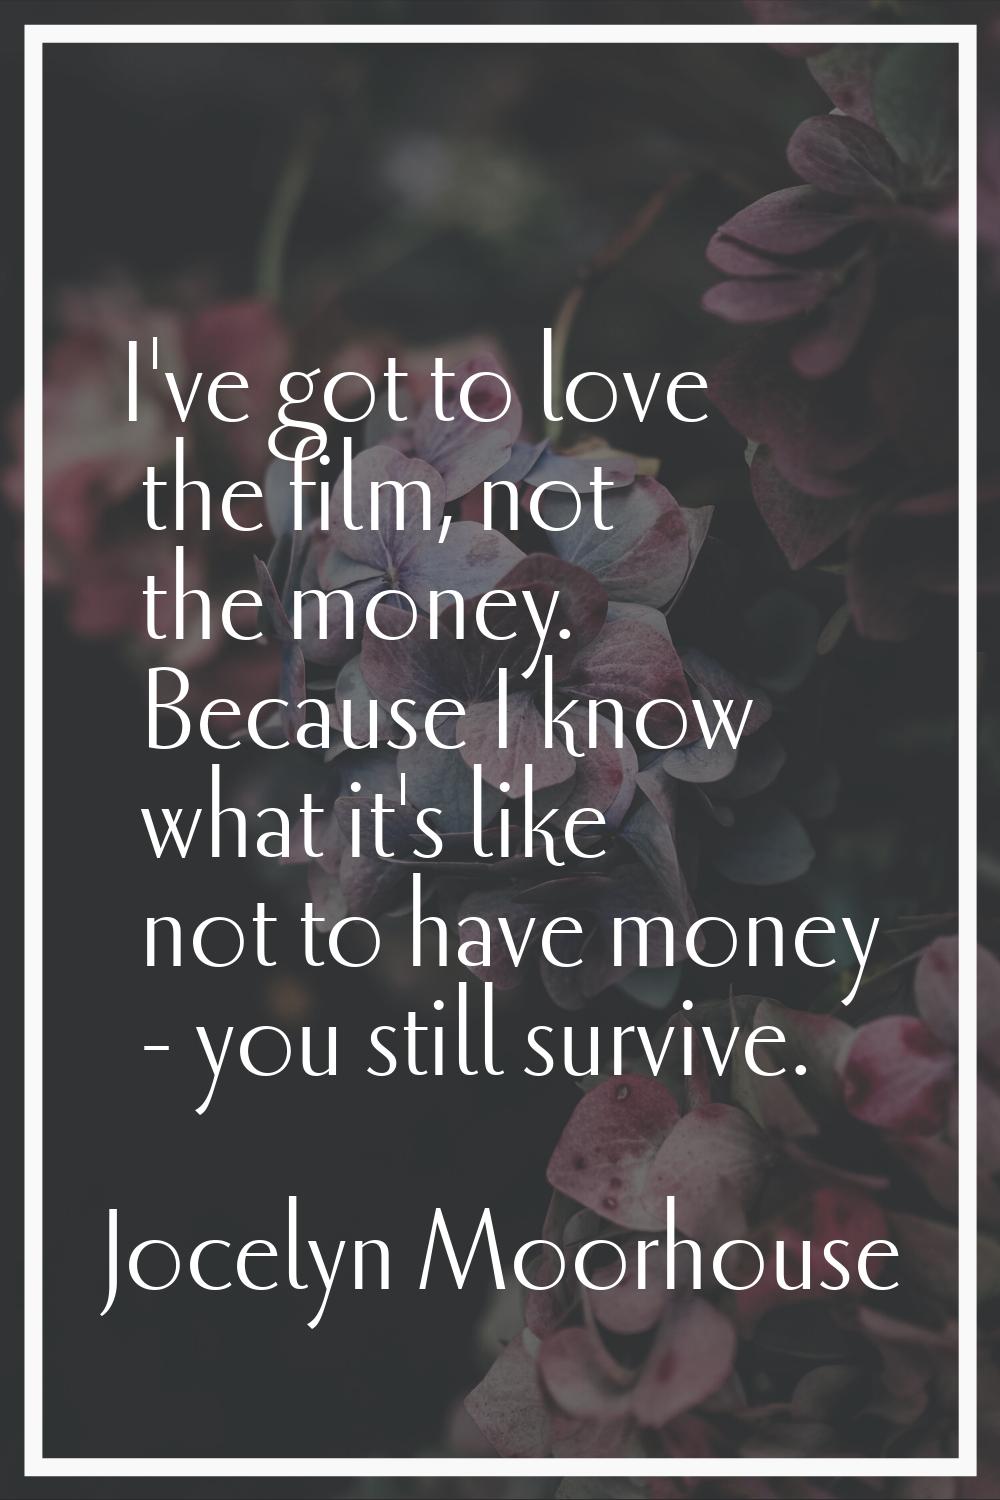 I've got to love the film, not the money. Because I know what it's like not to have money - you sti